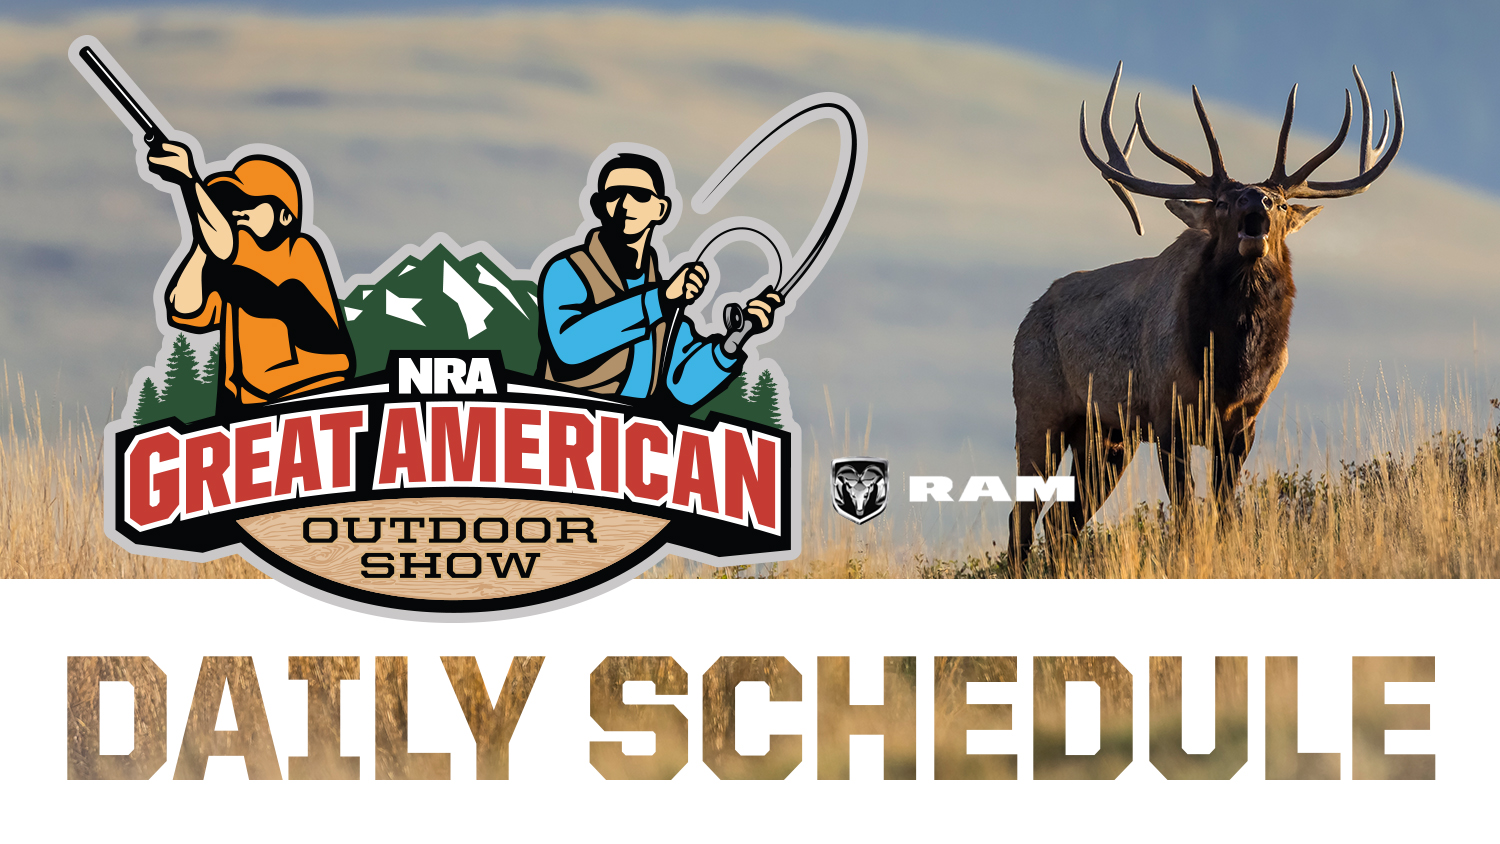 2019 Great American Outdoor Show Daily Schedule - Tuesday, February 5